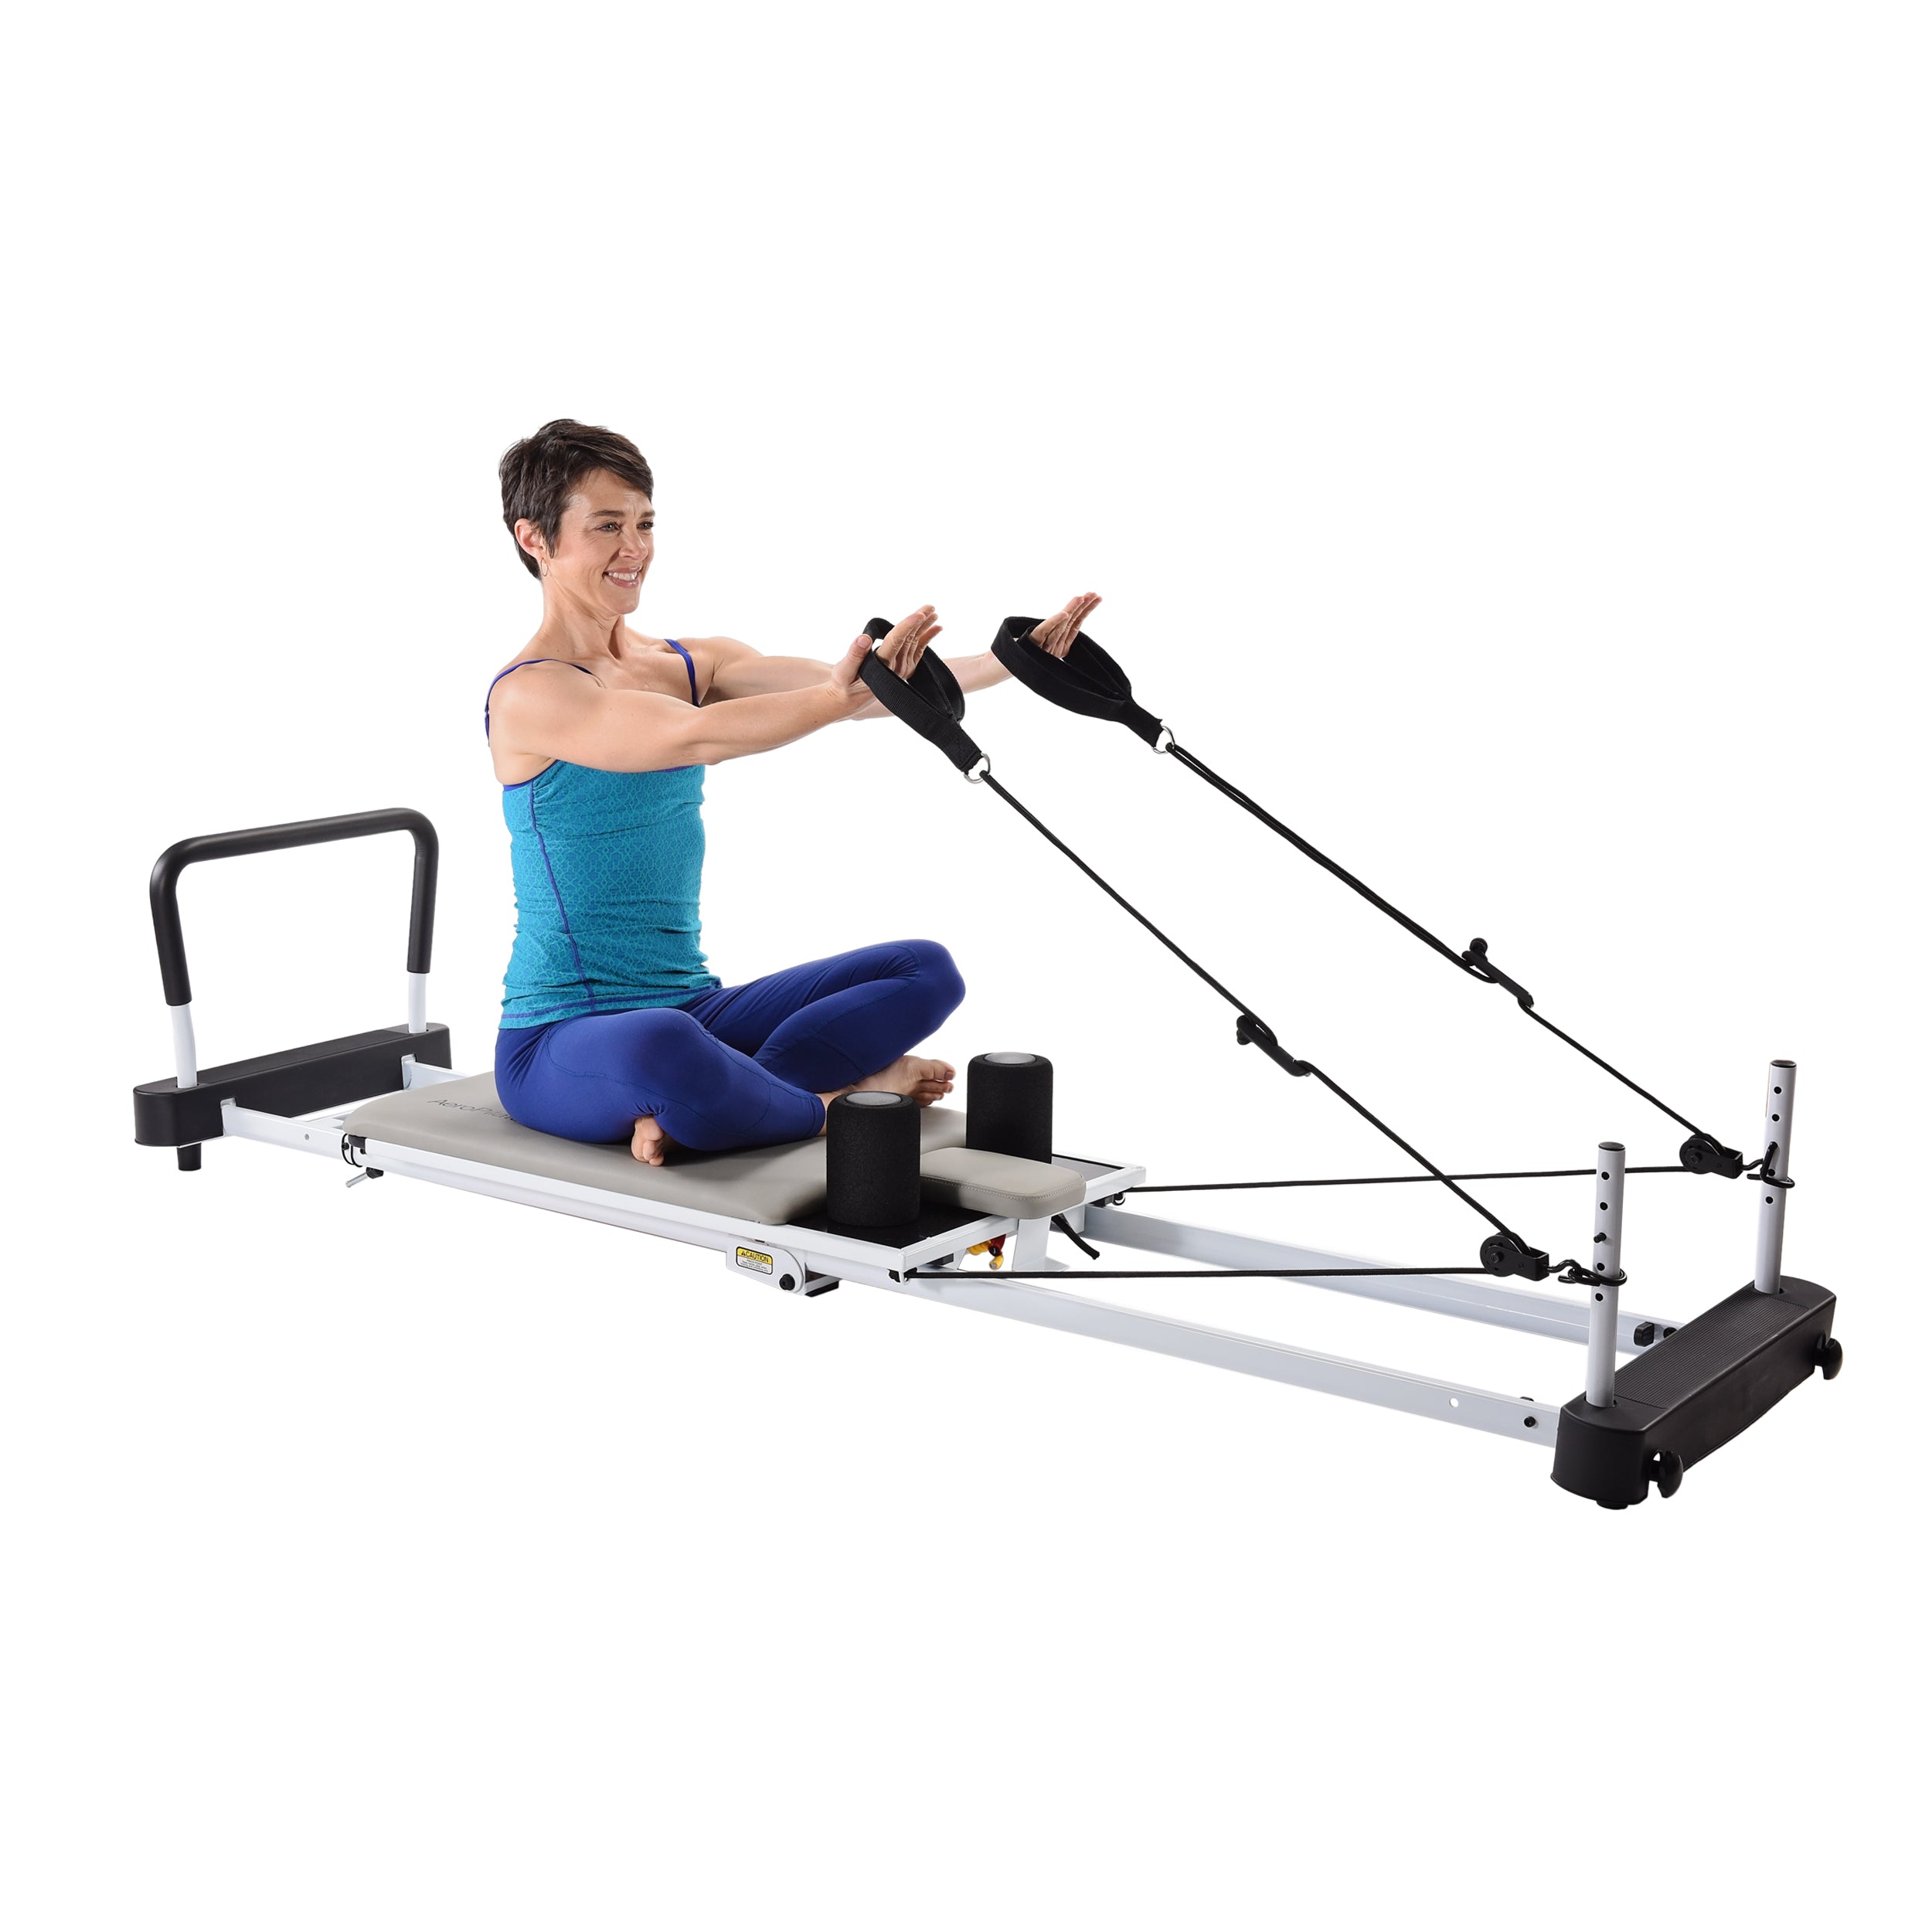 AeroPilates 5Cord Pro Reformer 5104 with 6 Workout DVDs 